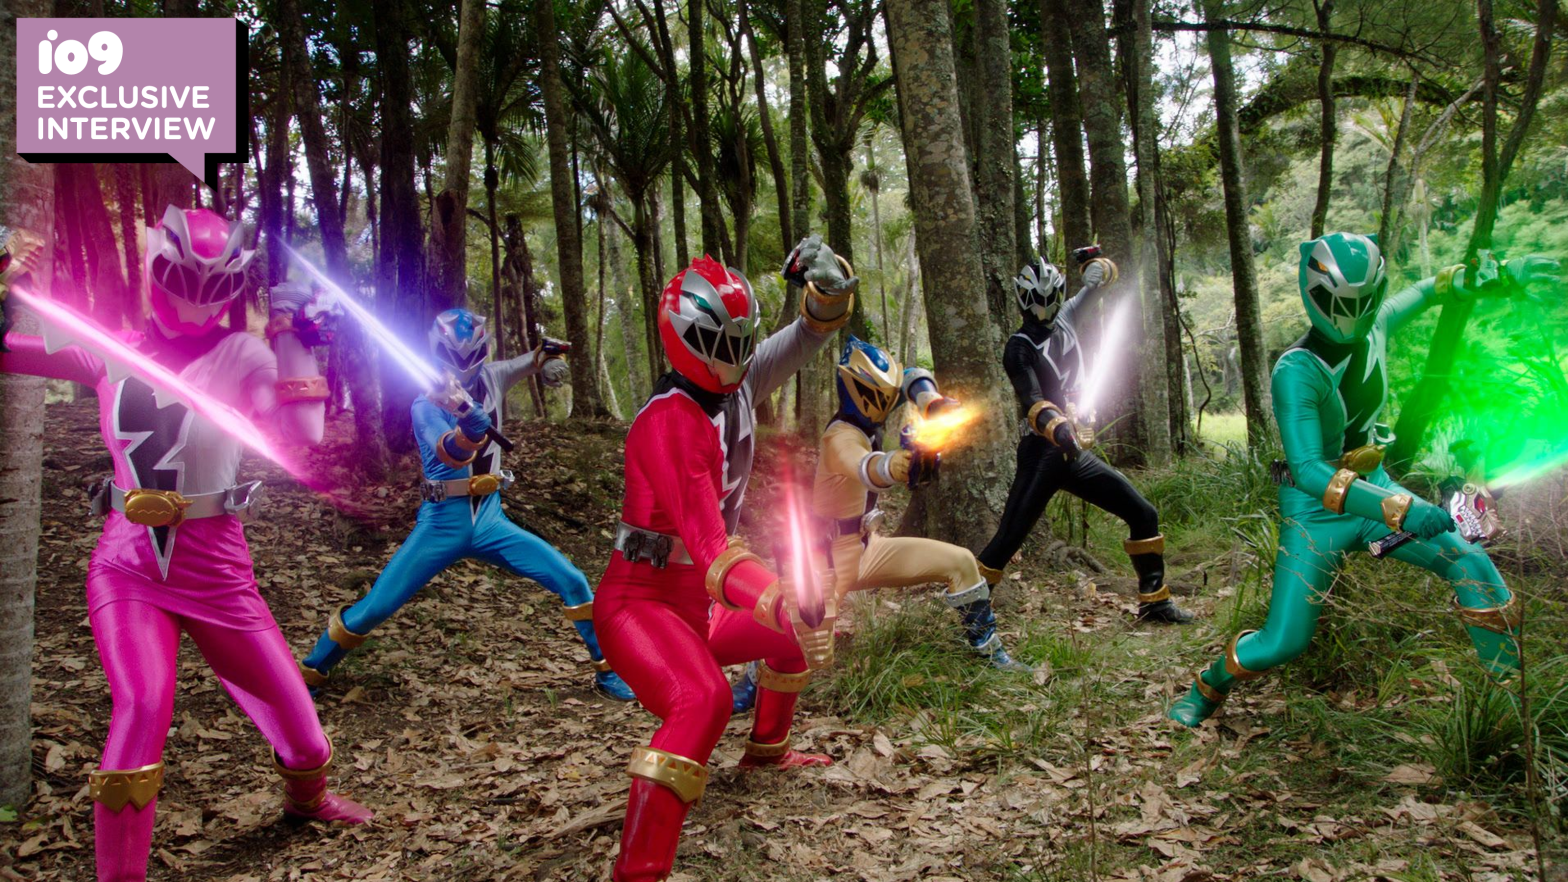 The Dino Fury rangers stand ready for action. (Image: Hasbro)